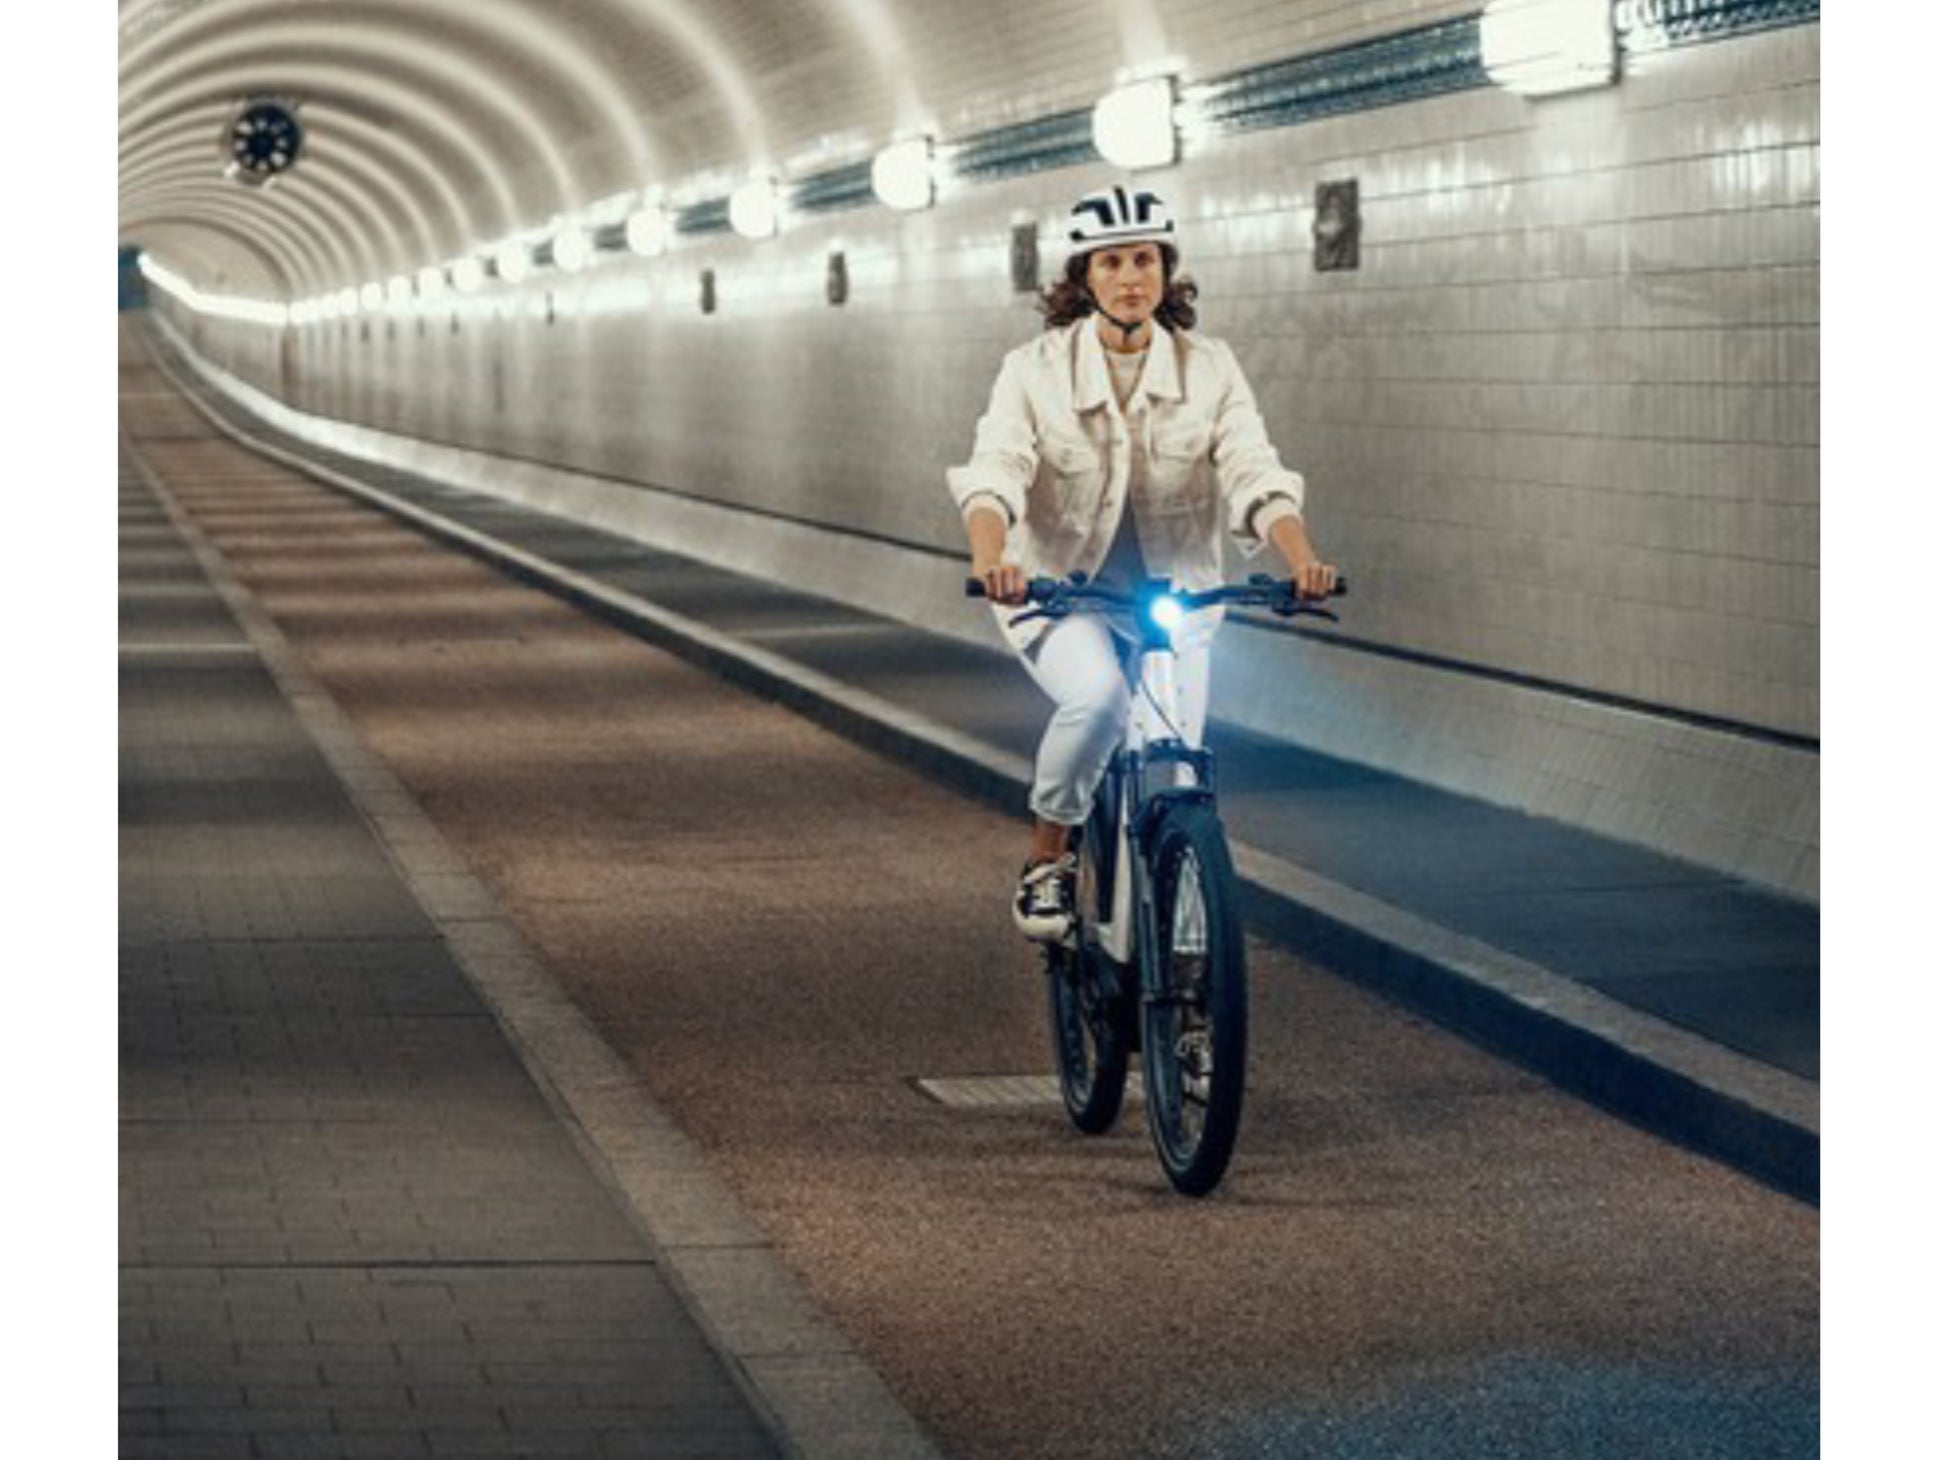 Riese and Muller Nevo GT Rohloff HS emtb hardtail woman riding on city tunnel bike path headlight on